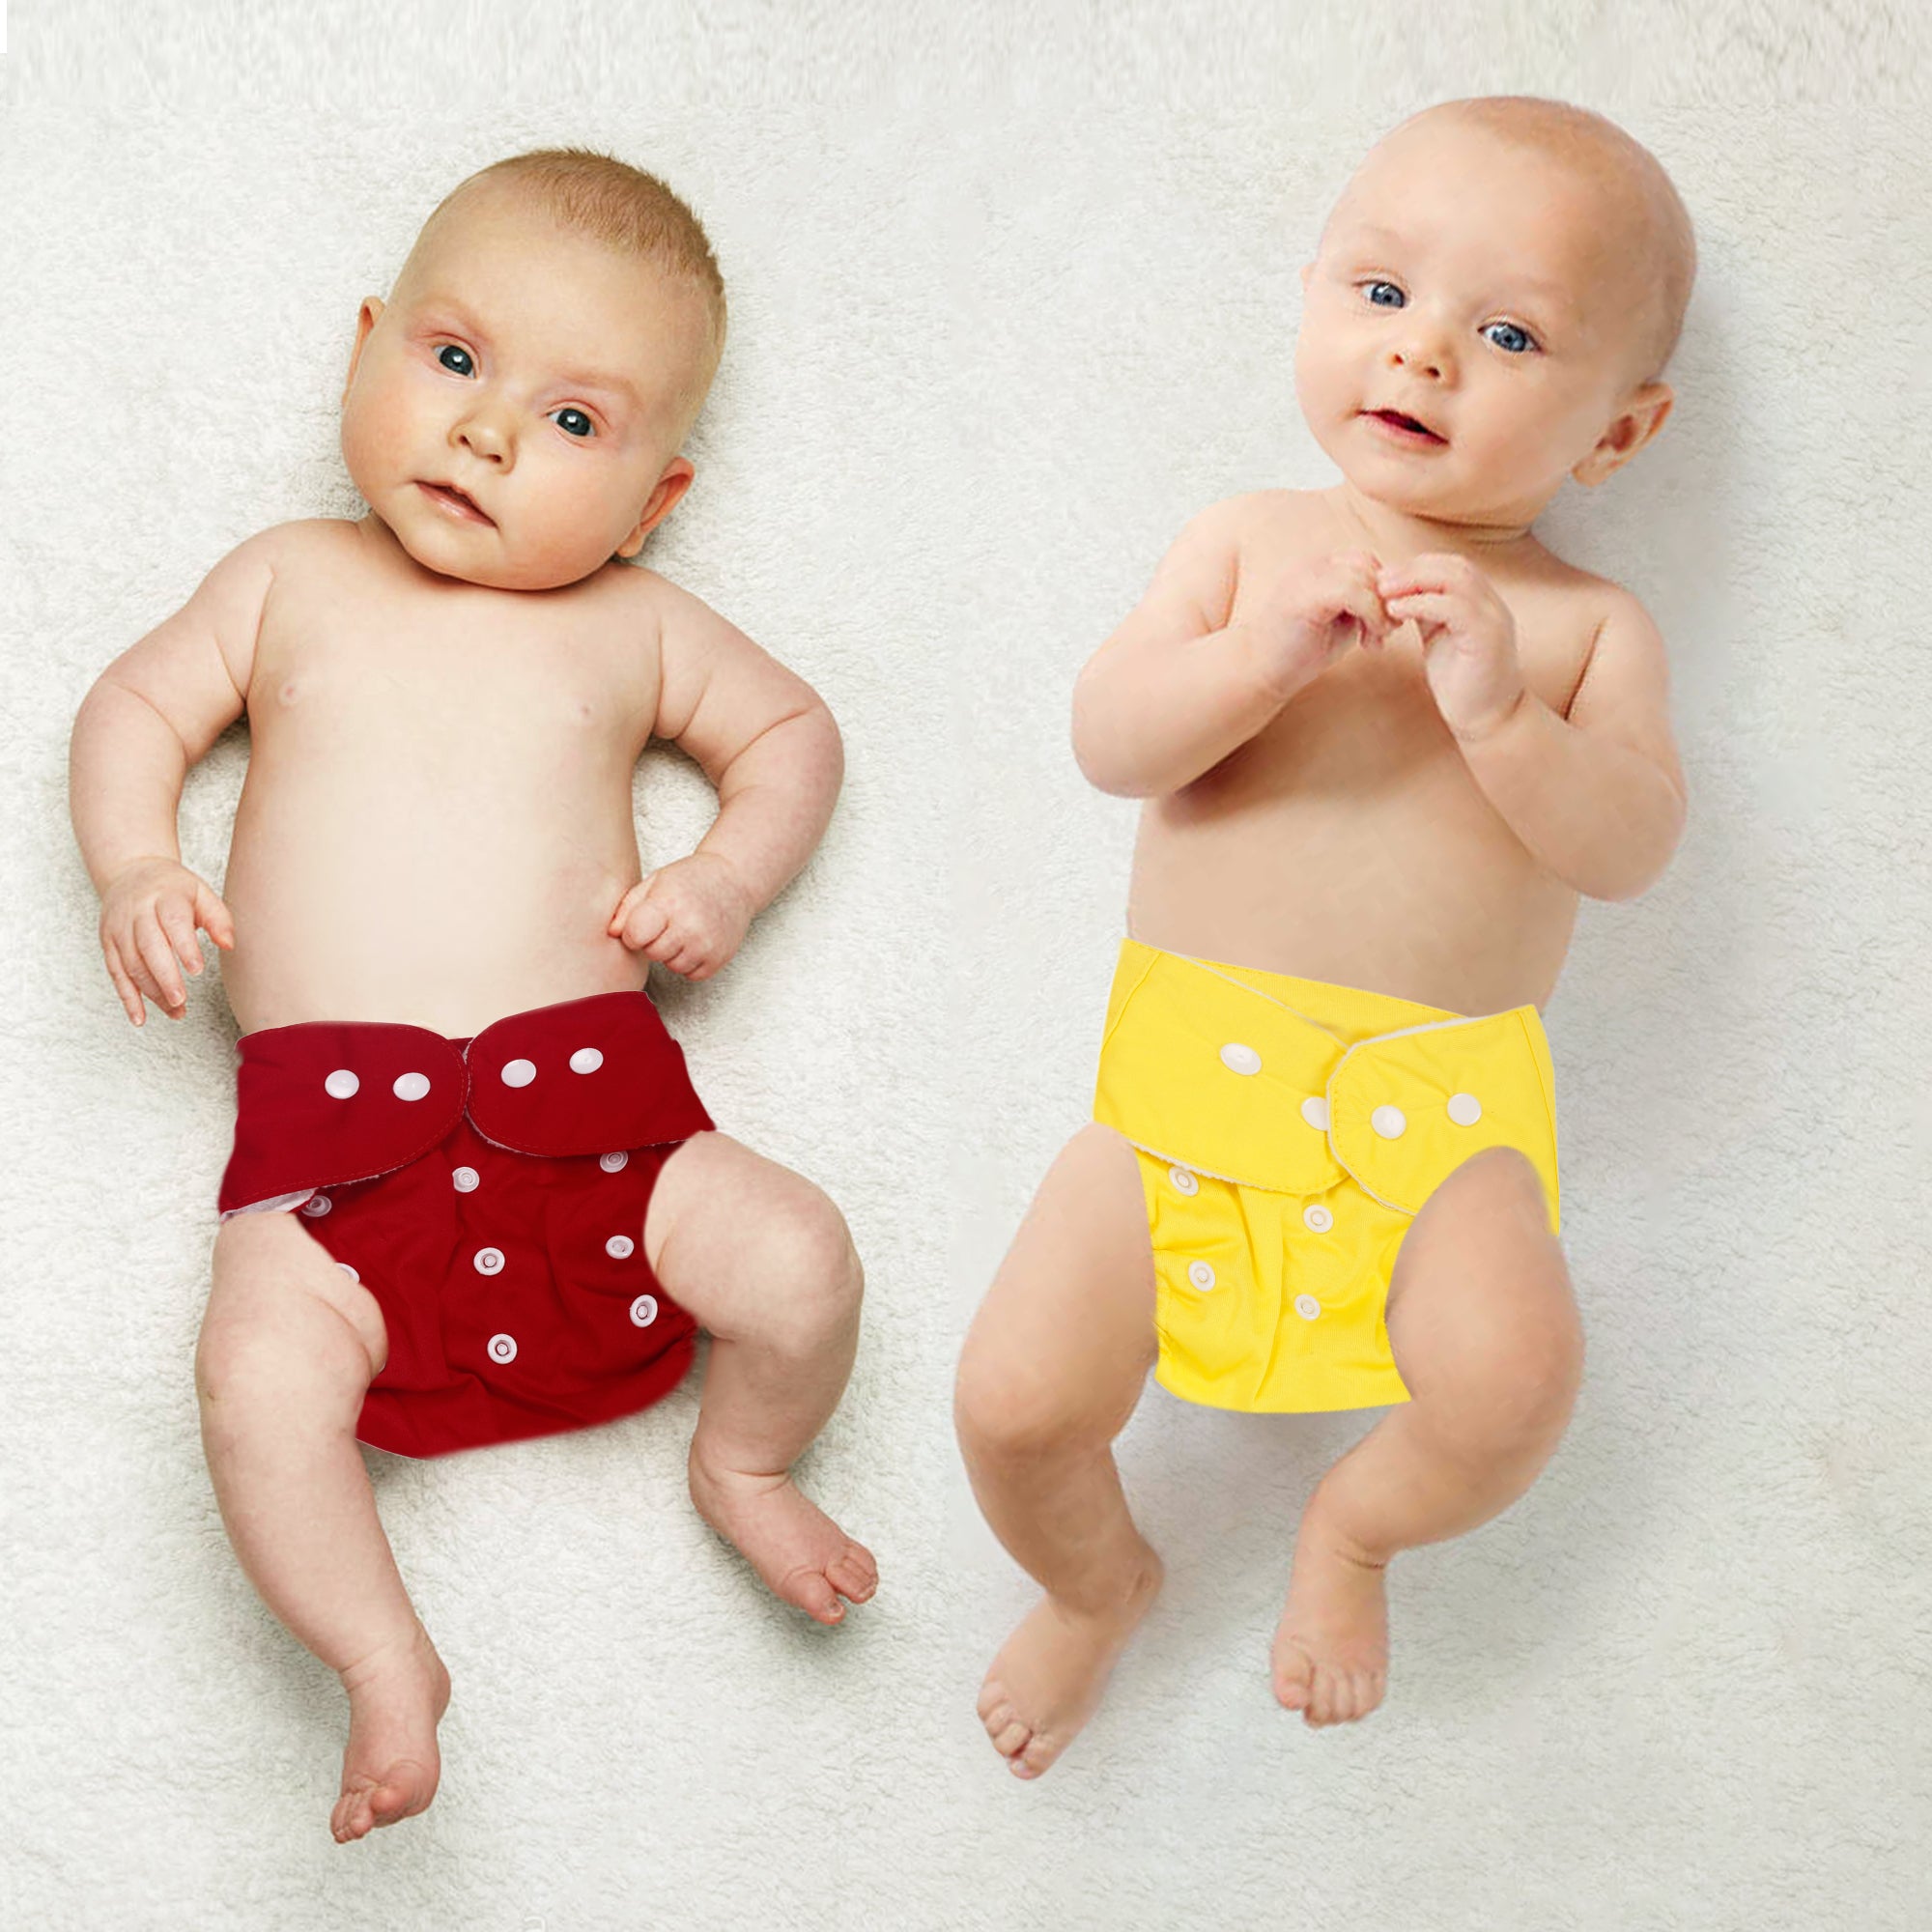 Plain Red And Yellow Reusable 2 Pk Diaper - Baby Moo